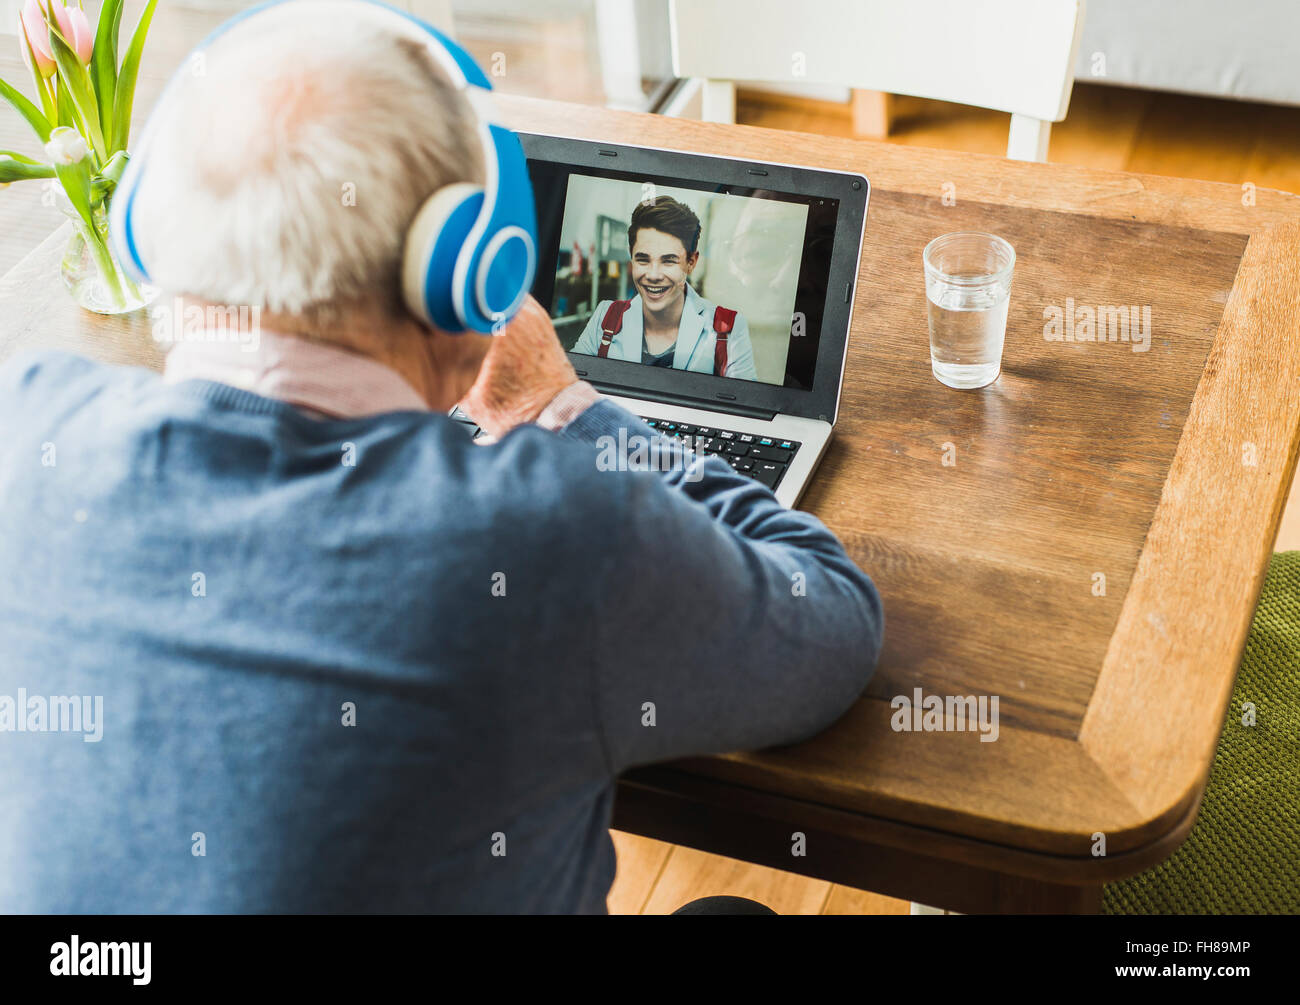 Senior man using laptop and headphones for skyping with his grandson Stock Photo